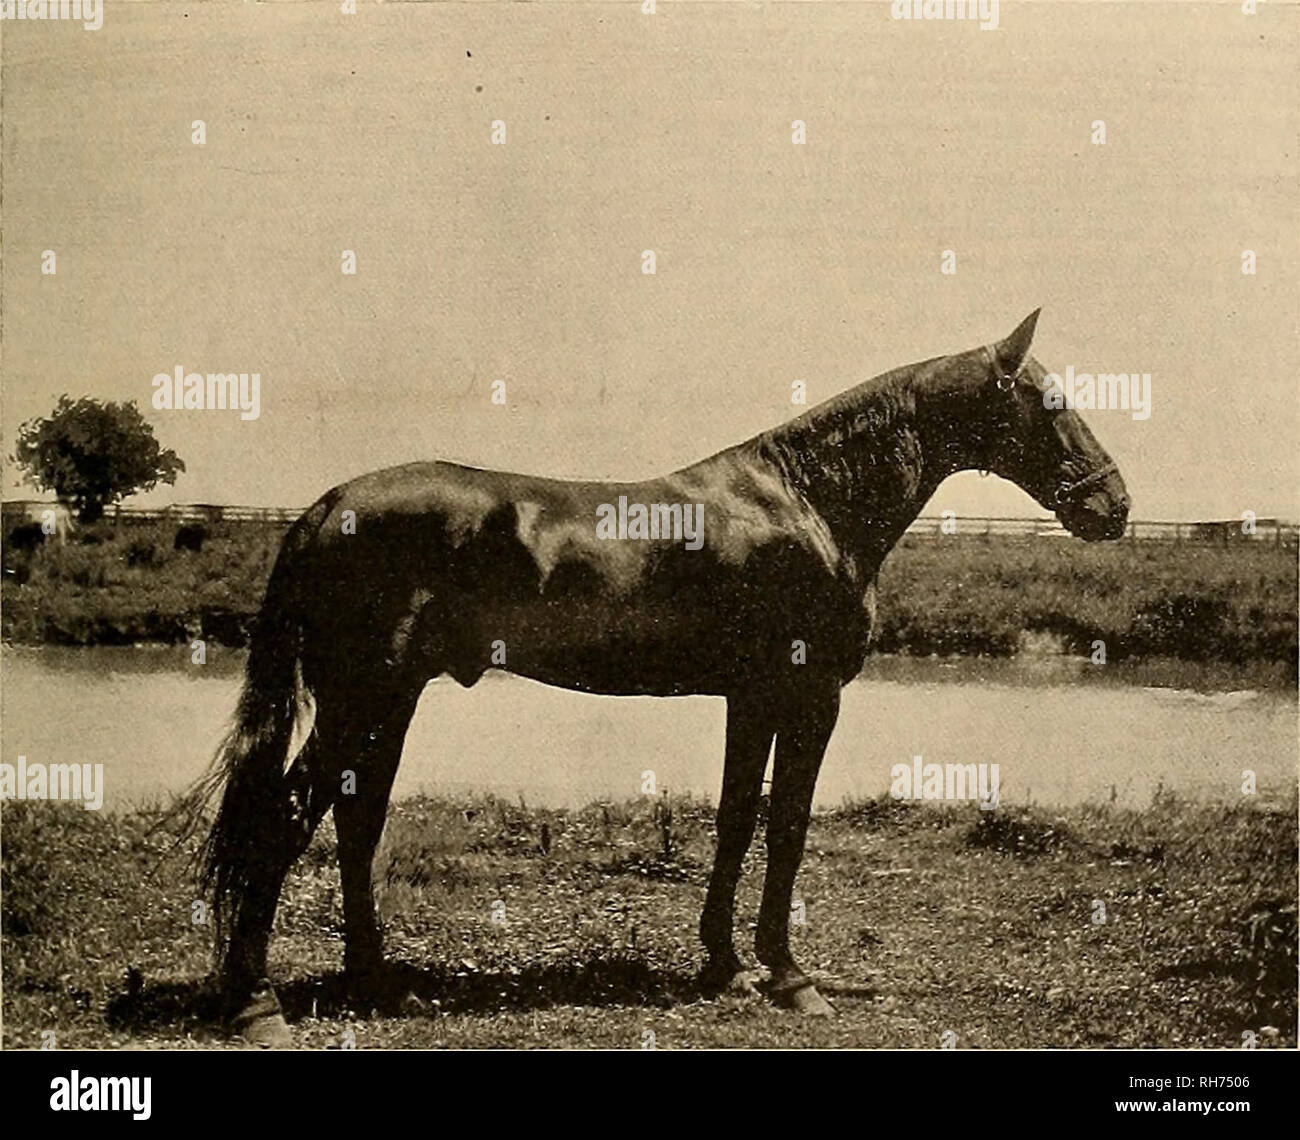 . Breeder and sportsman. Horses. SEPTEMBER 30, 1905] ®hc gves&amp;ev anb J&amp;pvvxzman 5 || NOTES AND NEWS. An agent of Mr. A. R. Tewksbury, of New South Wales, recently purchased from L. E. Brown of Delevan, Illinois, a four months old colt by Parole, dam Meadow Queen, sister to Great Heart 2:12% by Mambrino Russell, second dam by Geo. &quot;Wilkes. Three new 2:10 trotters in one race is pretty close to the record. Pat Ford, Belle C. and Tom Miller, Jr., went in at Galesburg in the six heat 2:15 trot. It is claimed there were 100,000 people on the grounds of the Michigan State Fair on Septem Stock Photo